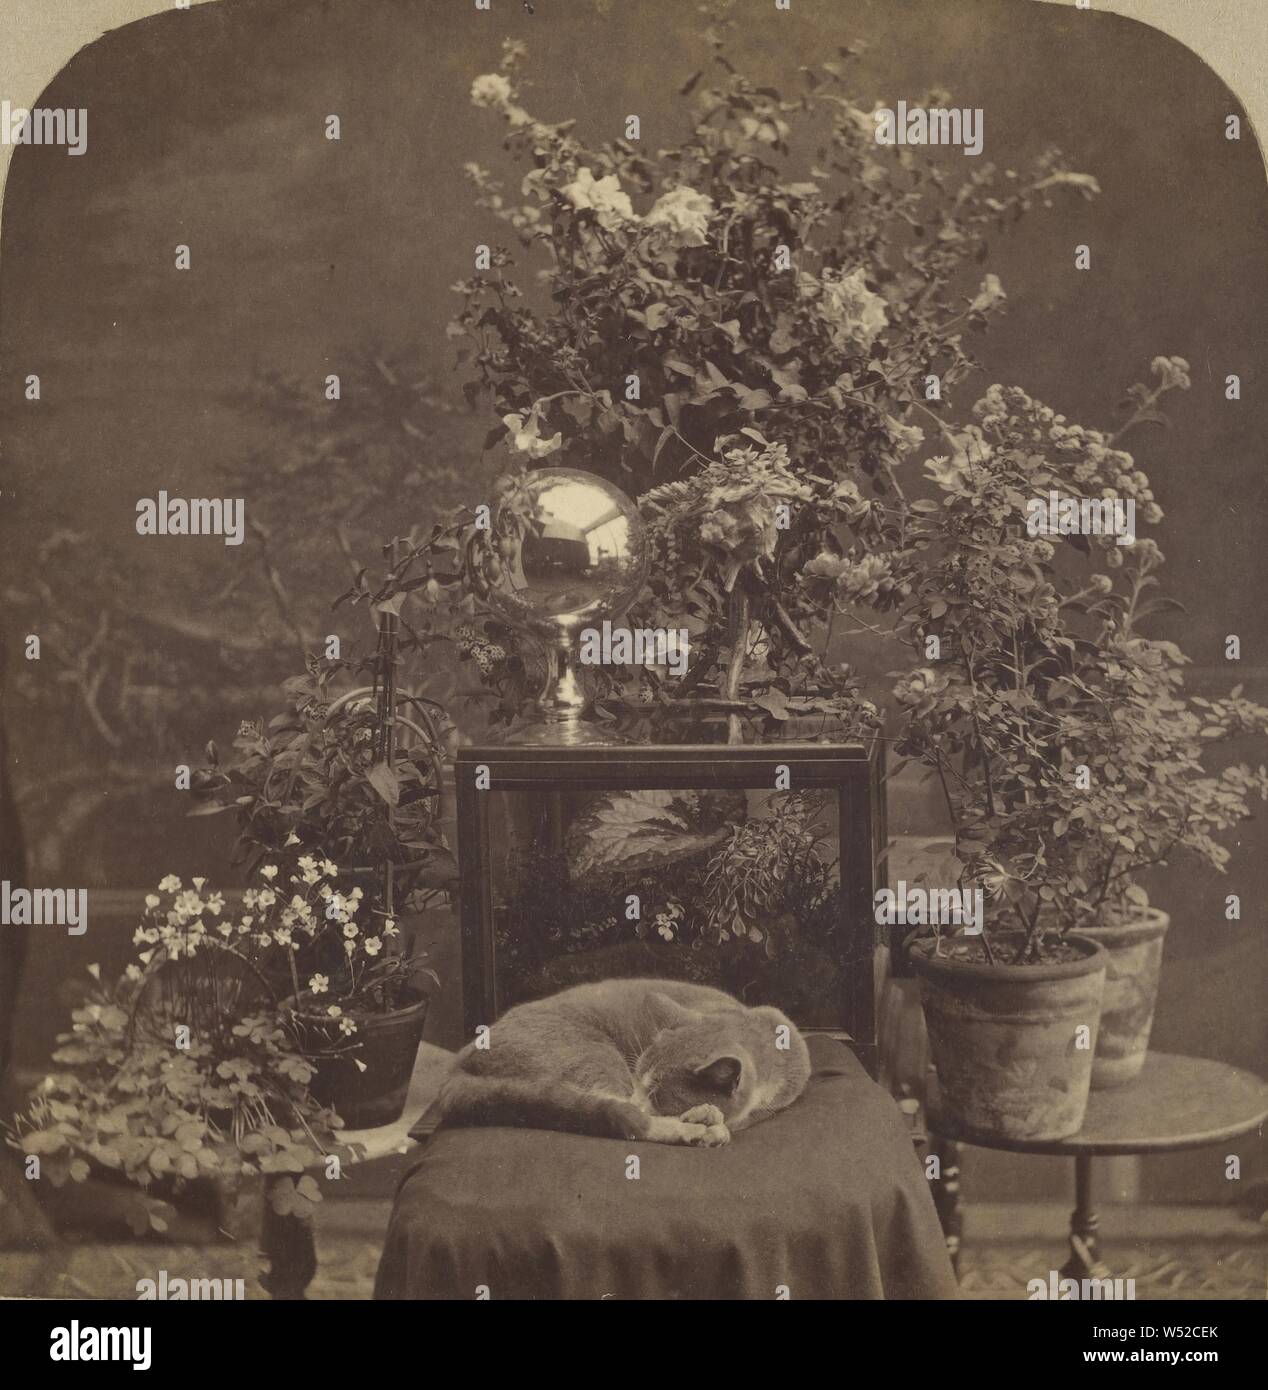 Cat asleep on padded chair, plants and flowers in background, G.H. Nickerson (American, active 1860s - 1880s), about 1875, Albumen silver print Stock Photo